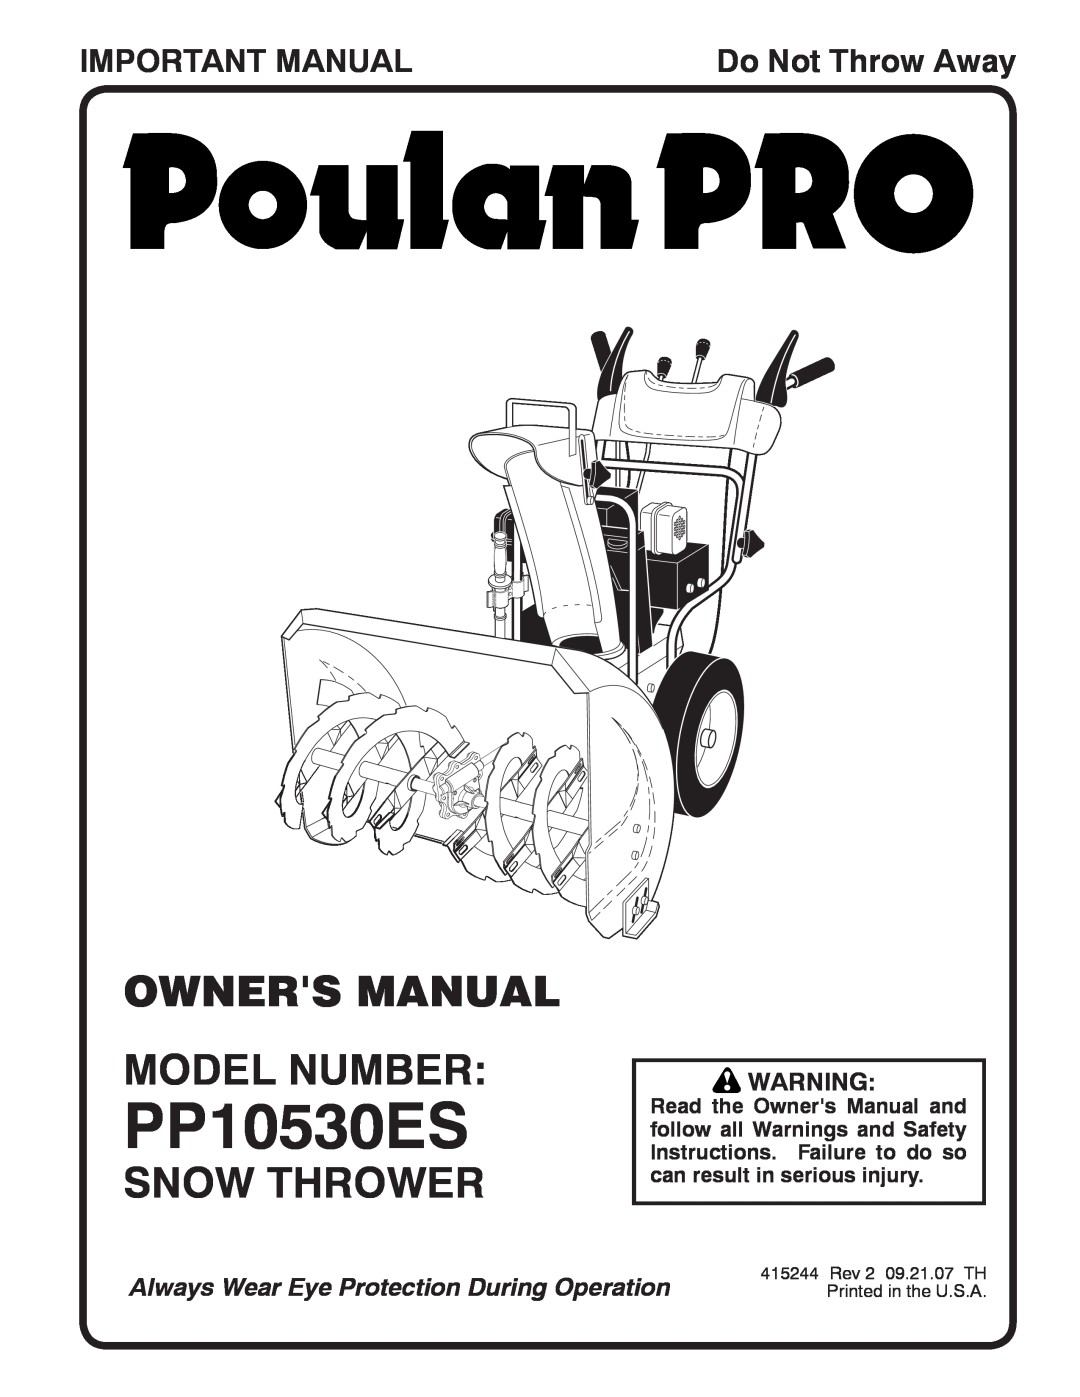 Poulan 96192001801, 415244 owner manual Snow Thrower, Important Manual, PP10530ES, Do Not Throw Away 